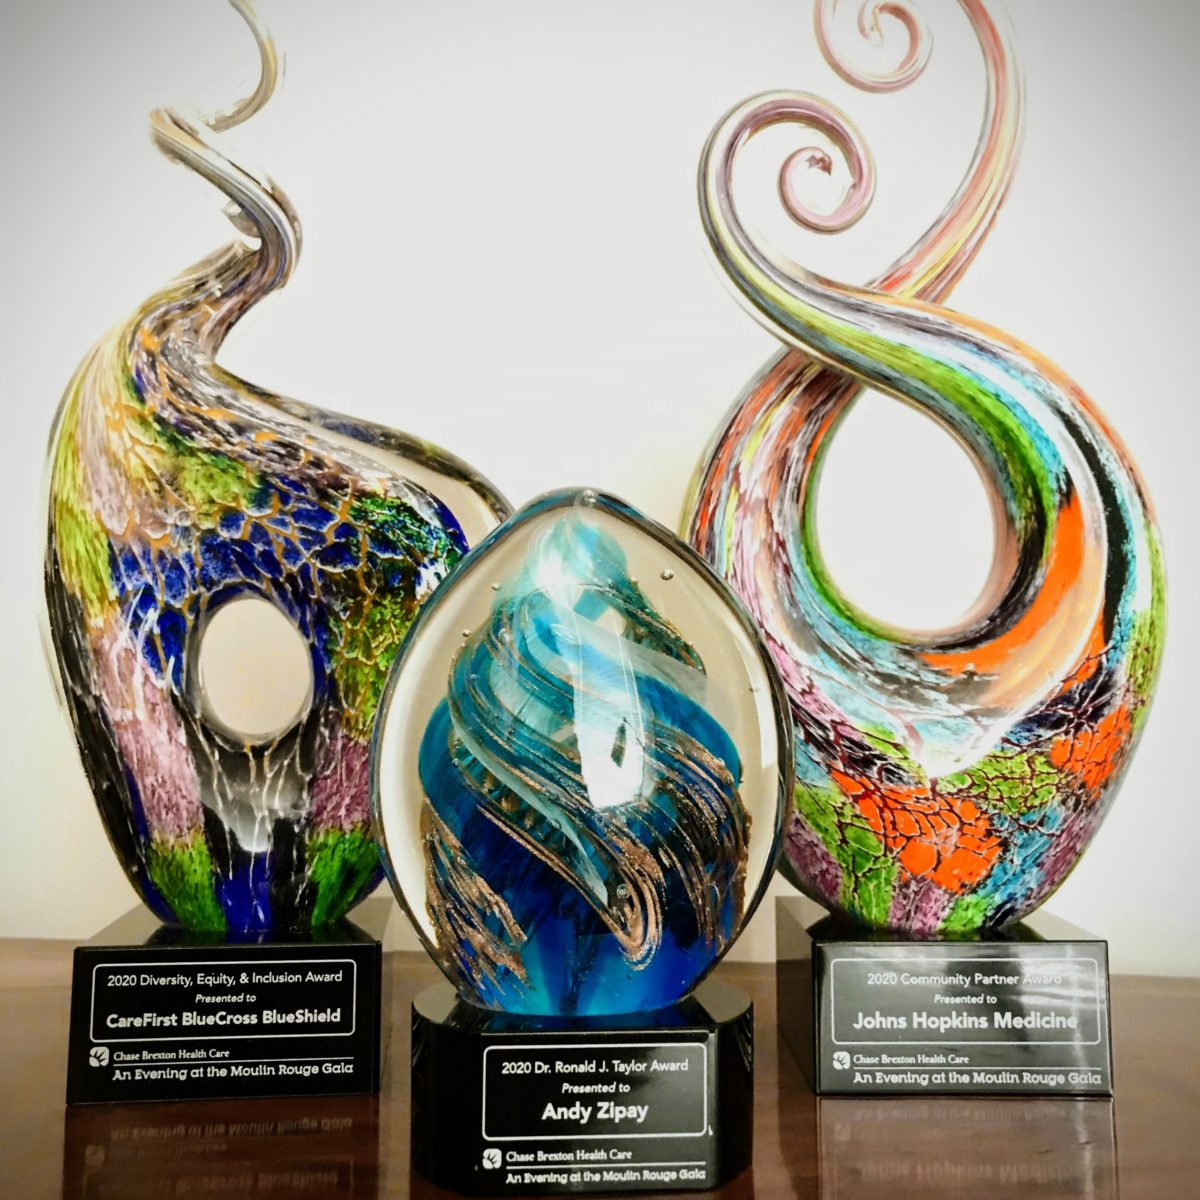 Chase Street Accessories & Engraving art glass awards create for Chase Brexton Health Care's gala